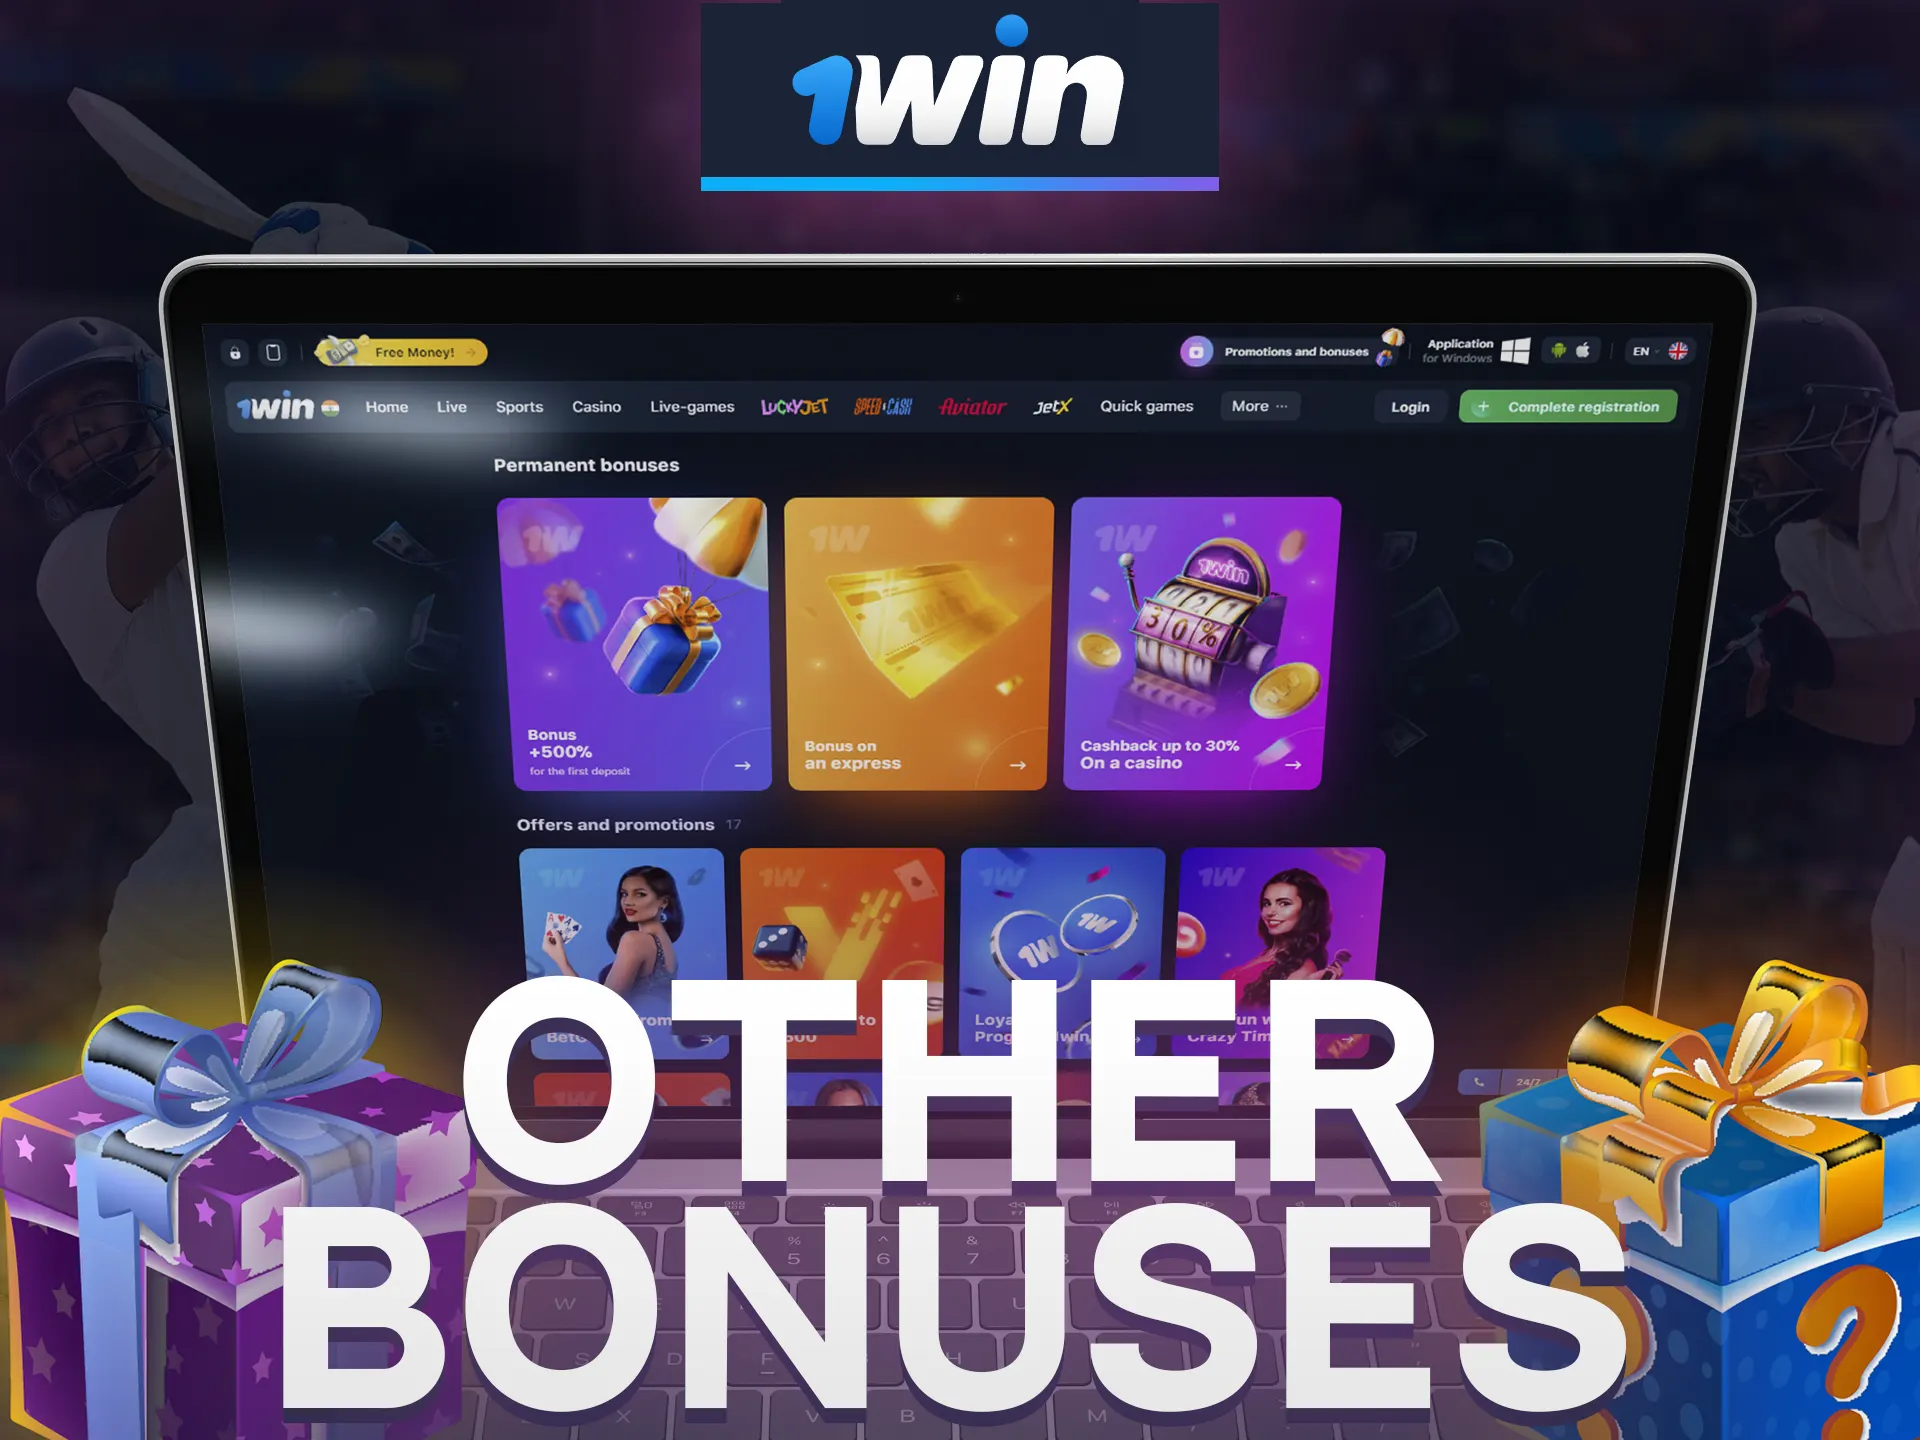 Learn more about other 1Win bonuses.